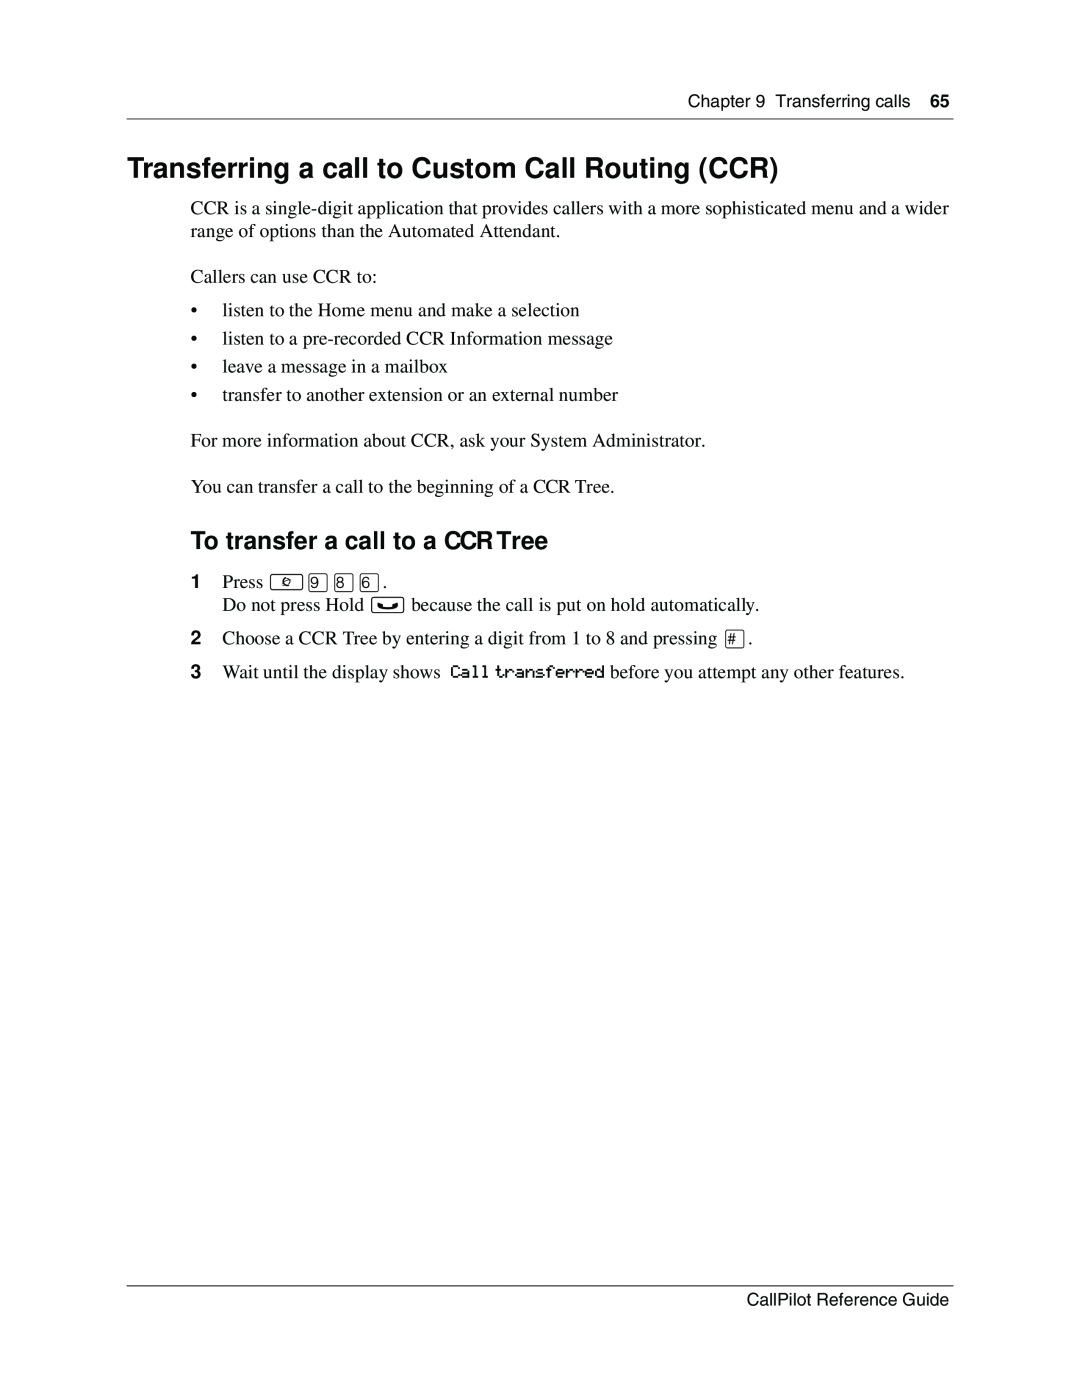 Nortel Networks CallPilot manual Transferring a call to Custom Call Routing CCR, To transfer a call to a CCR Tree 